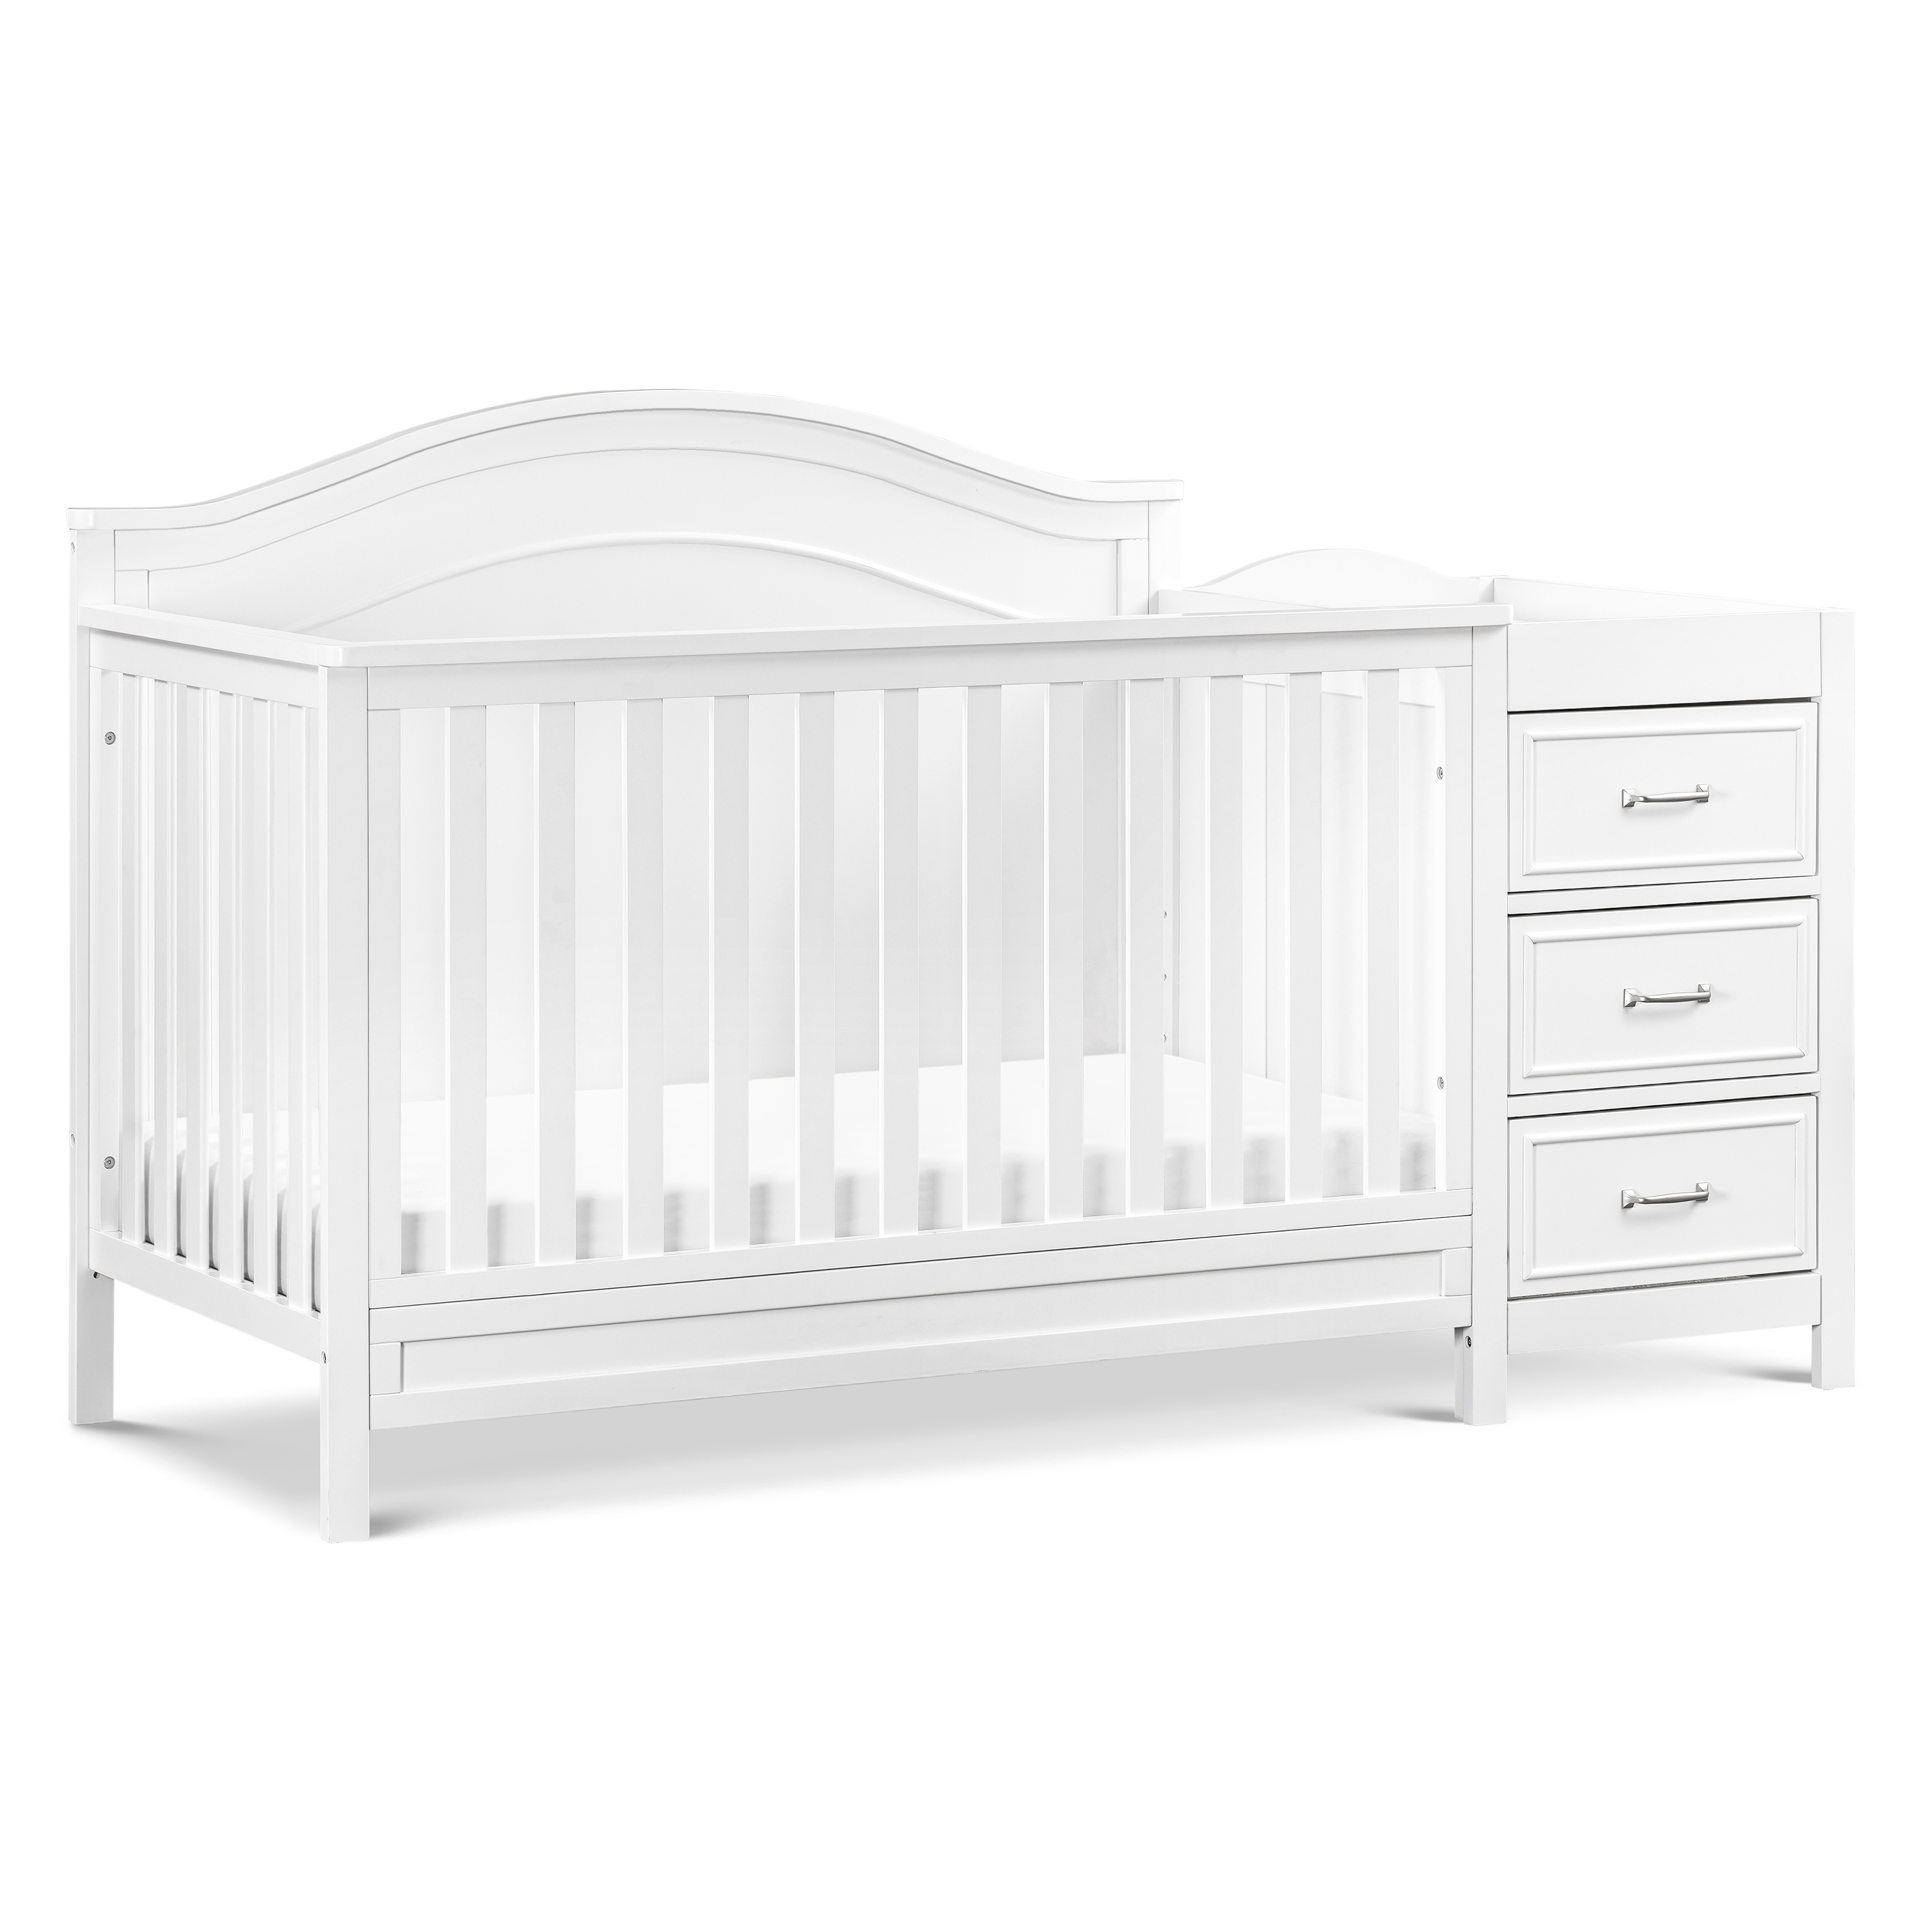 DaVinci Charlie 4-in-1 Convertible Crib and Changer Combo in White - image 1 of 11